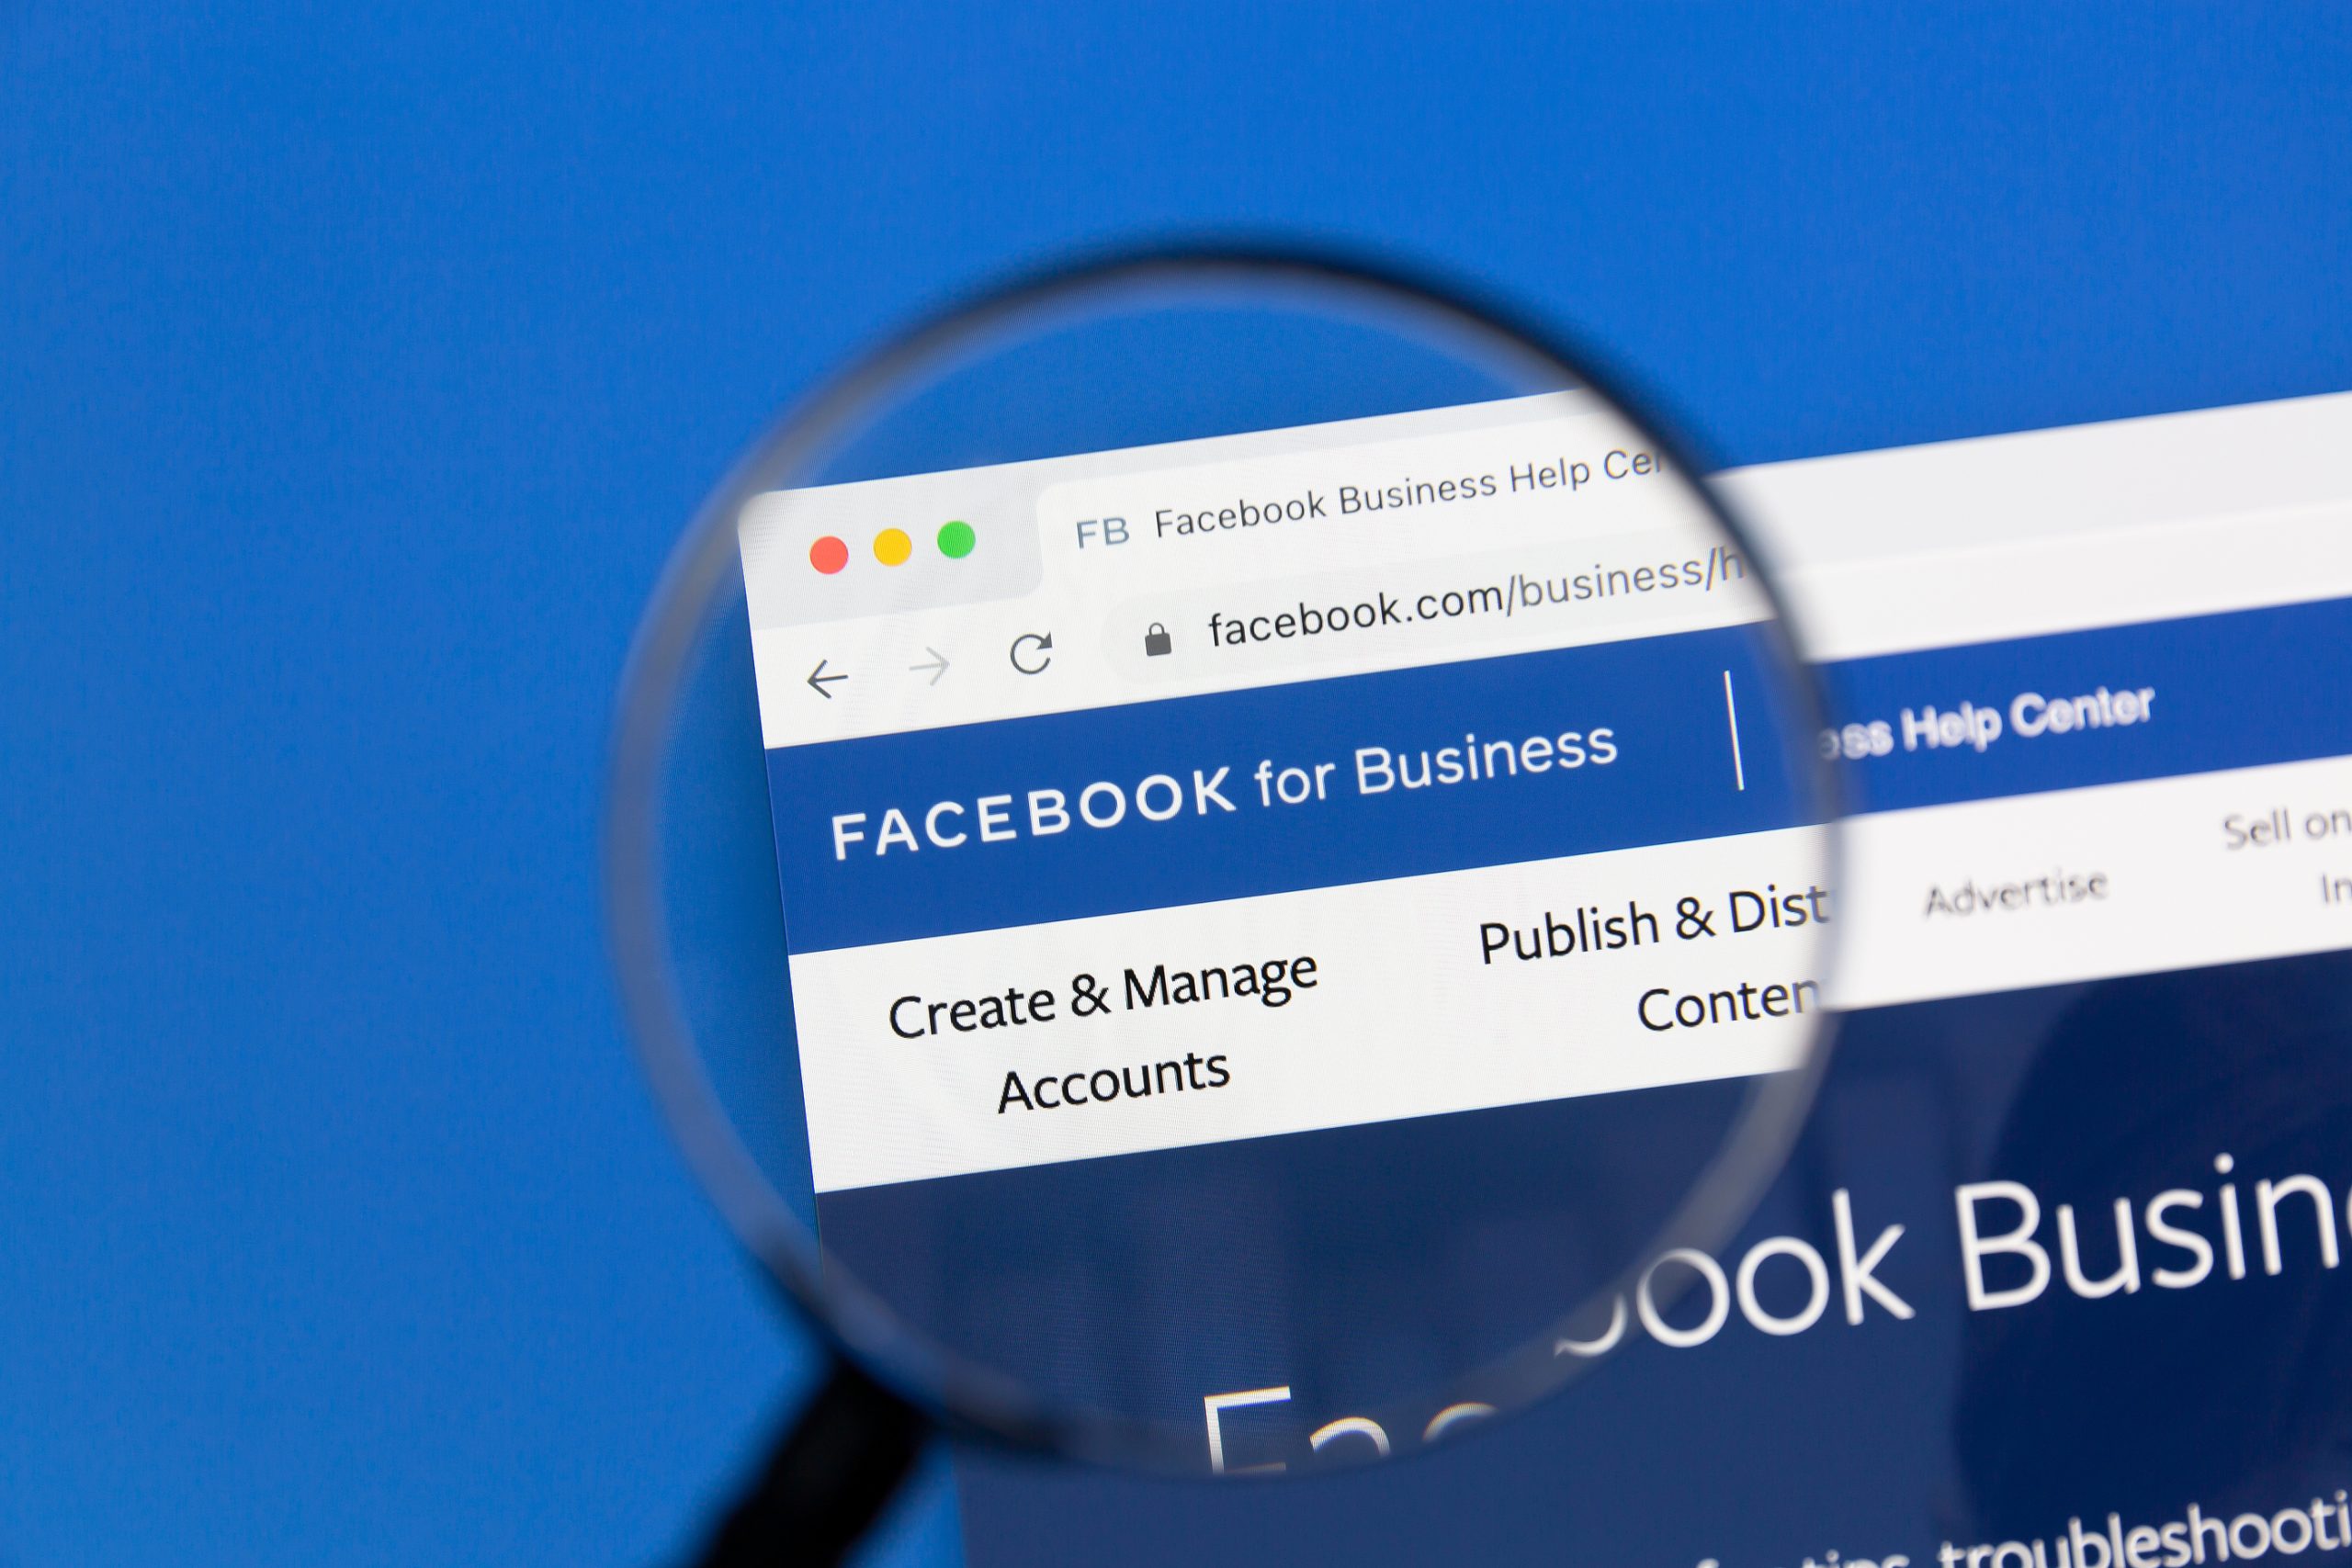 magnifying glass hovers over computer screen showing Facebook for Business webpage